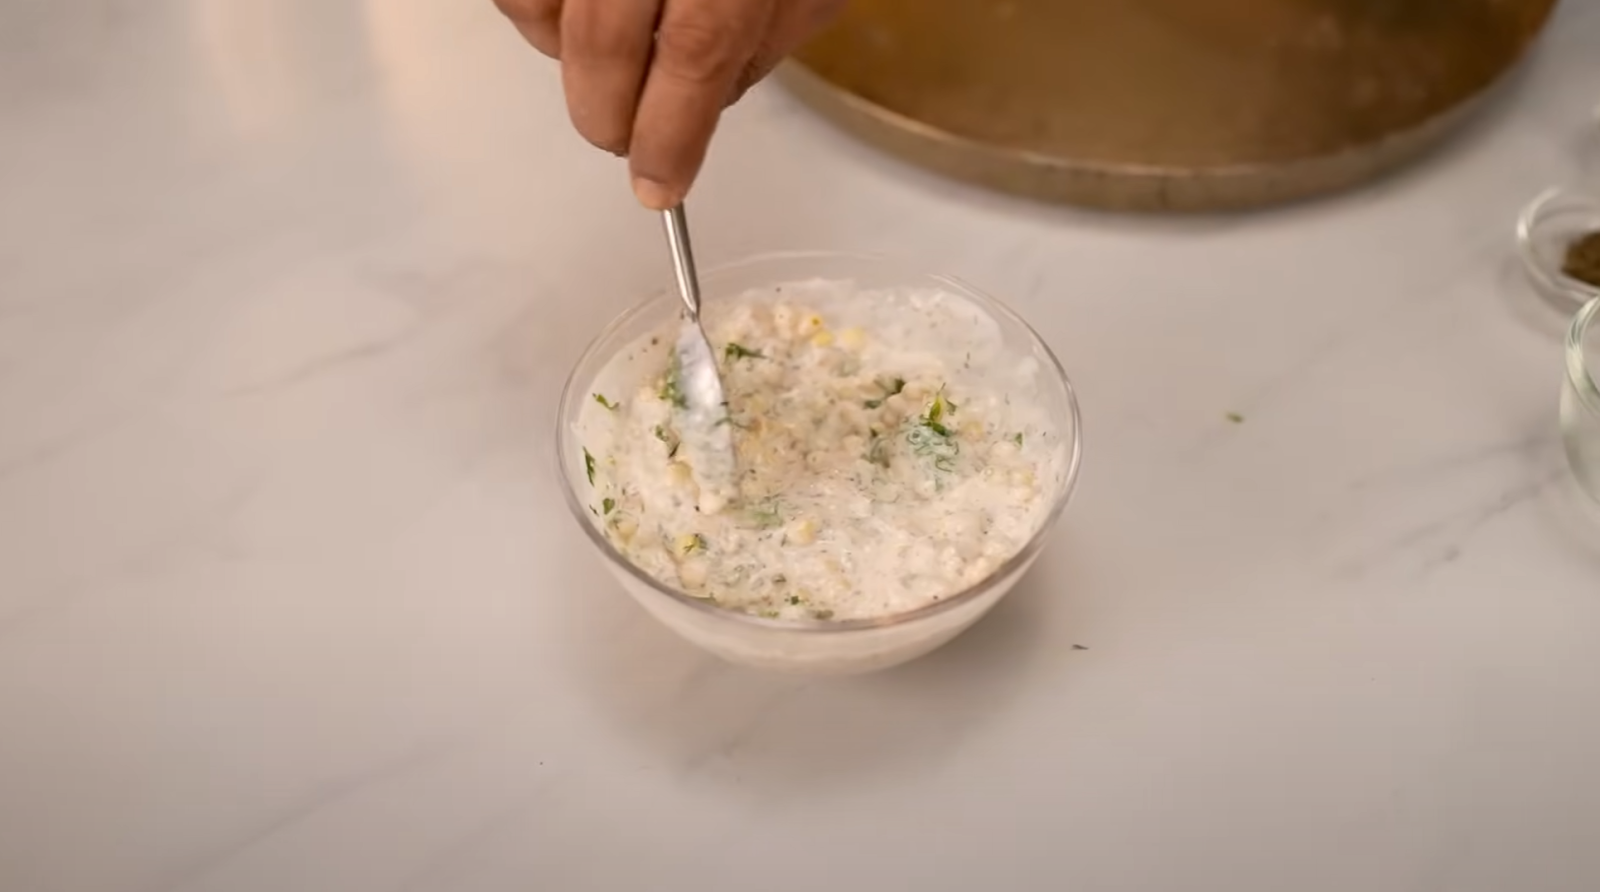 A bowl of raita garnished with roasted cumin powder and boondi, ready to be served.